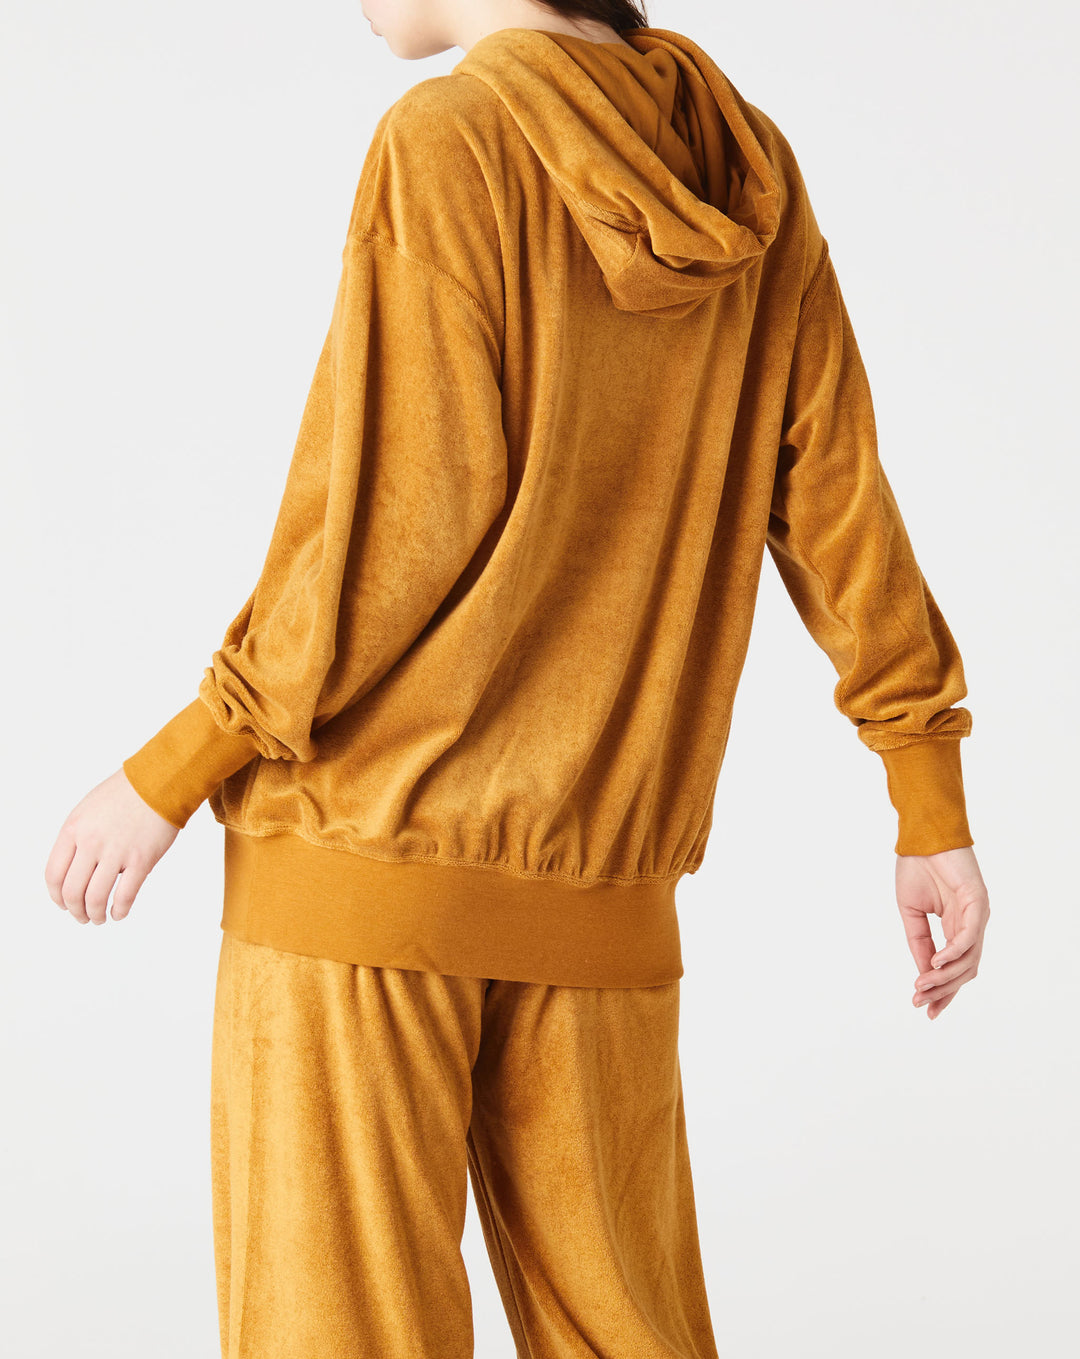 Nike Women's Terry Oversized Pullover Hoodie  - XHIBITION